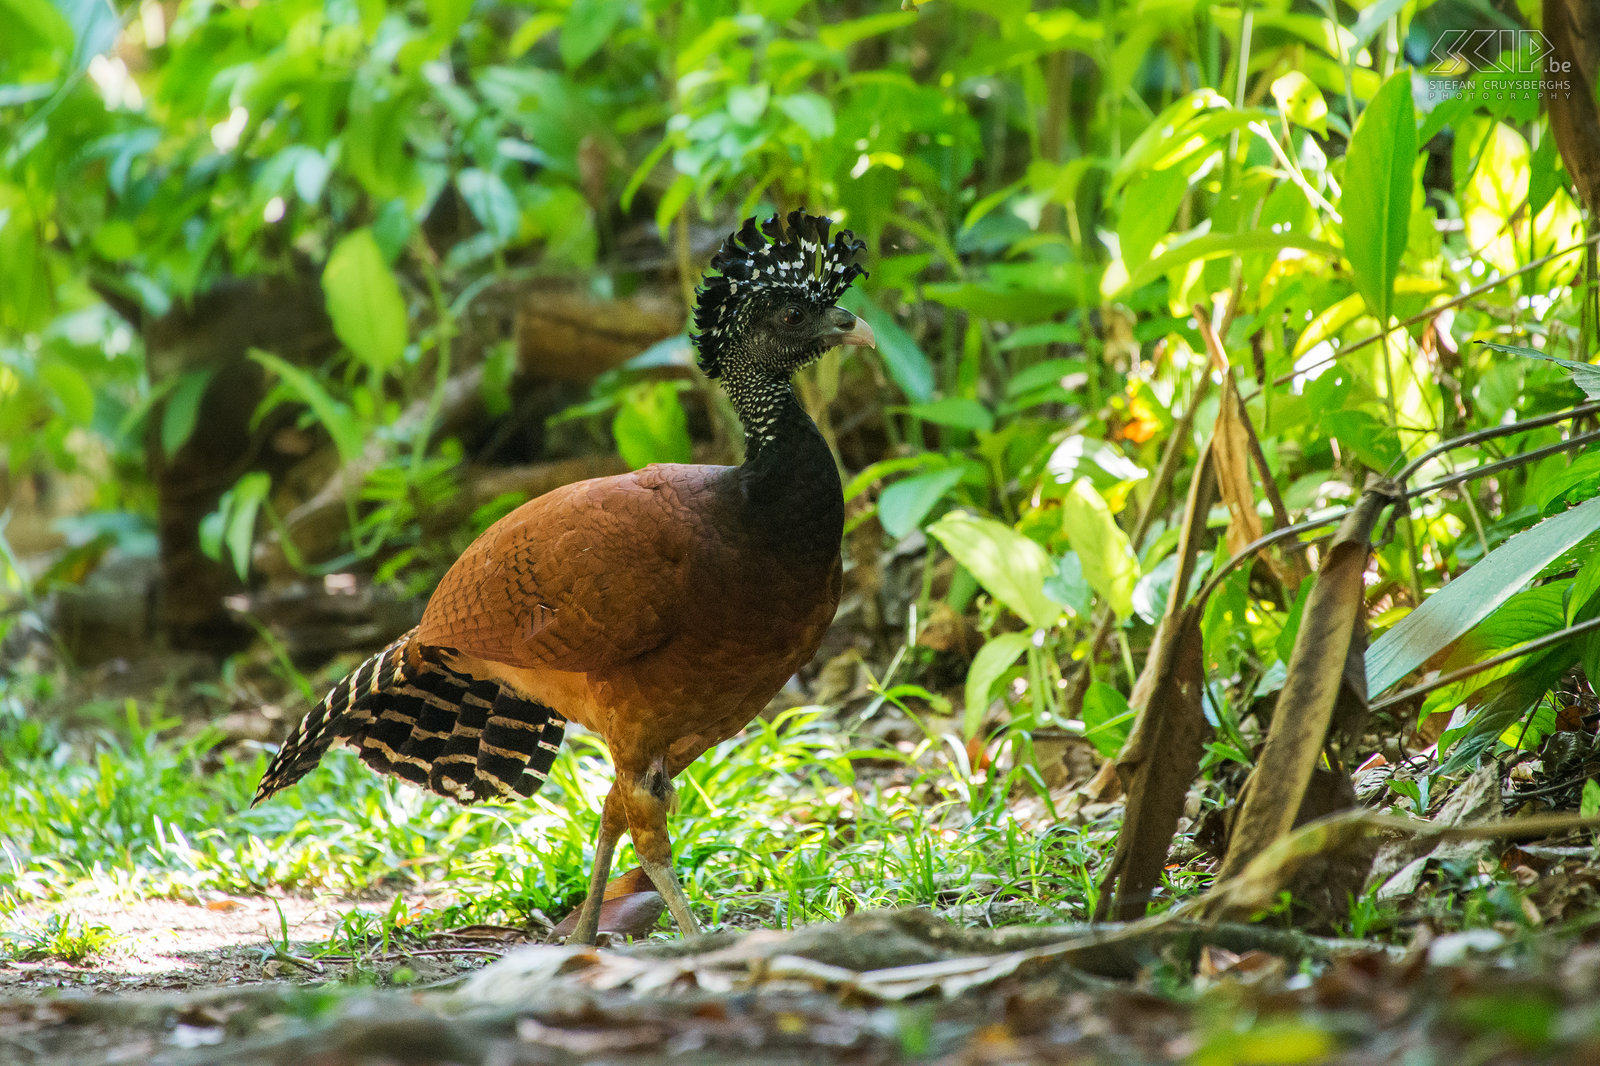 Dominical - Hacienda Baru - Great curassow In Dominical we stayed at Hacienda Baru, a wonderful lodge which has a lot of private trails through rainforests and mangroves. There we saw a female great curassow (crax rubra) which is a large pheasant-like bird. Stefan Cruysberghs